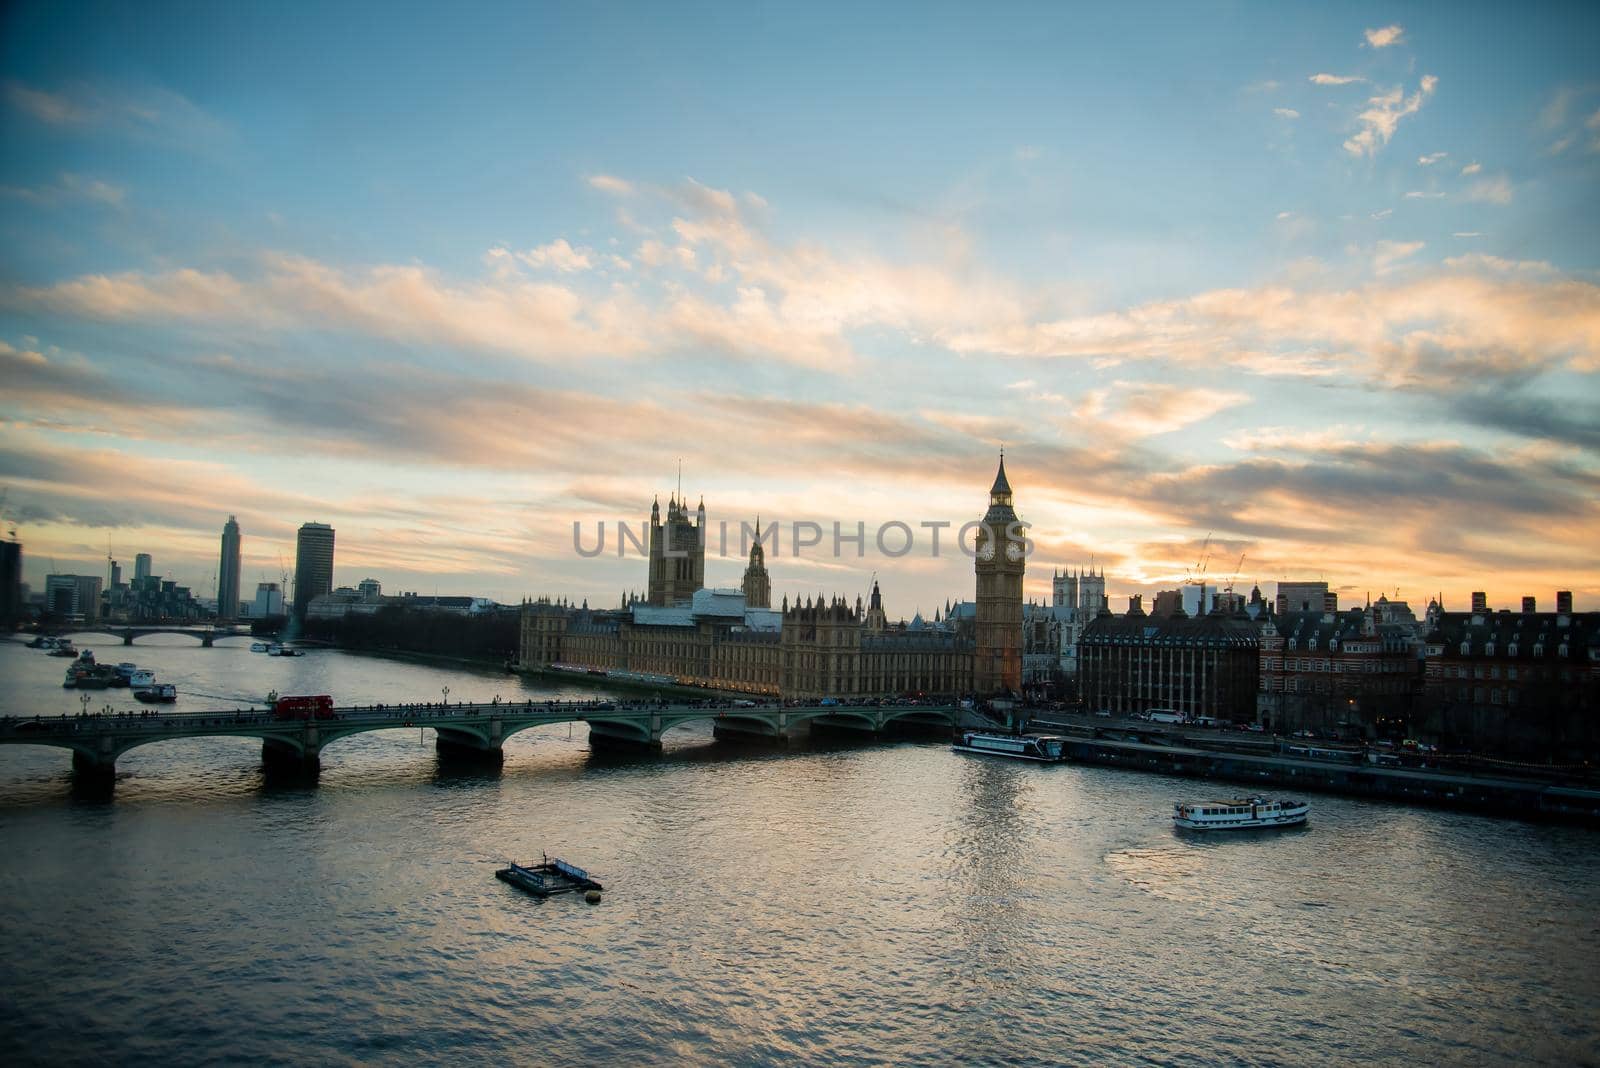 London skyline view at sunset with famous landmarks, Big Ben, Houses of Parliament and ships on River Thames with beautiful blue and yellow sky. by jyurinko